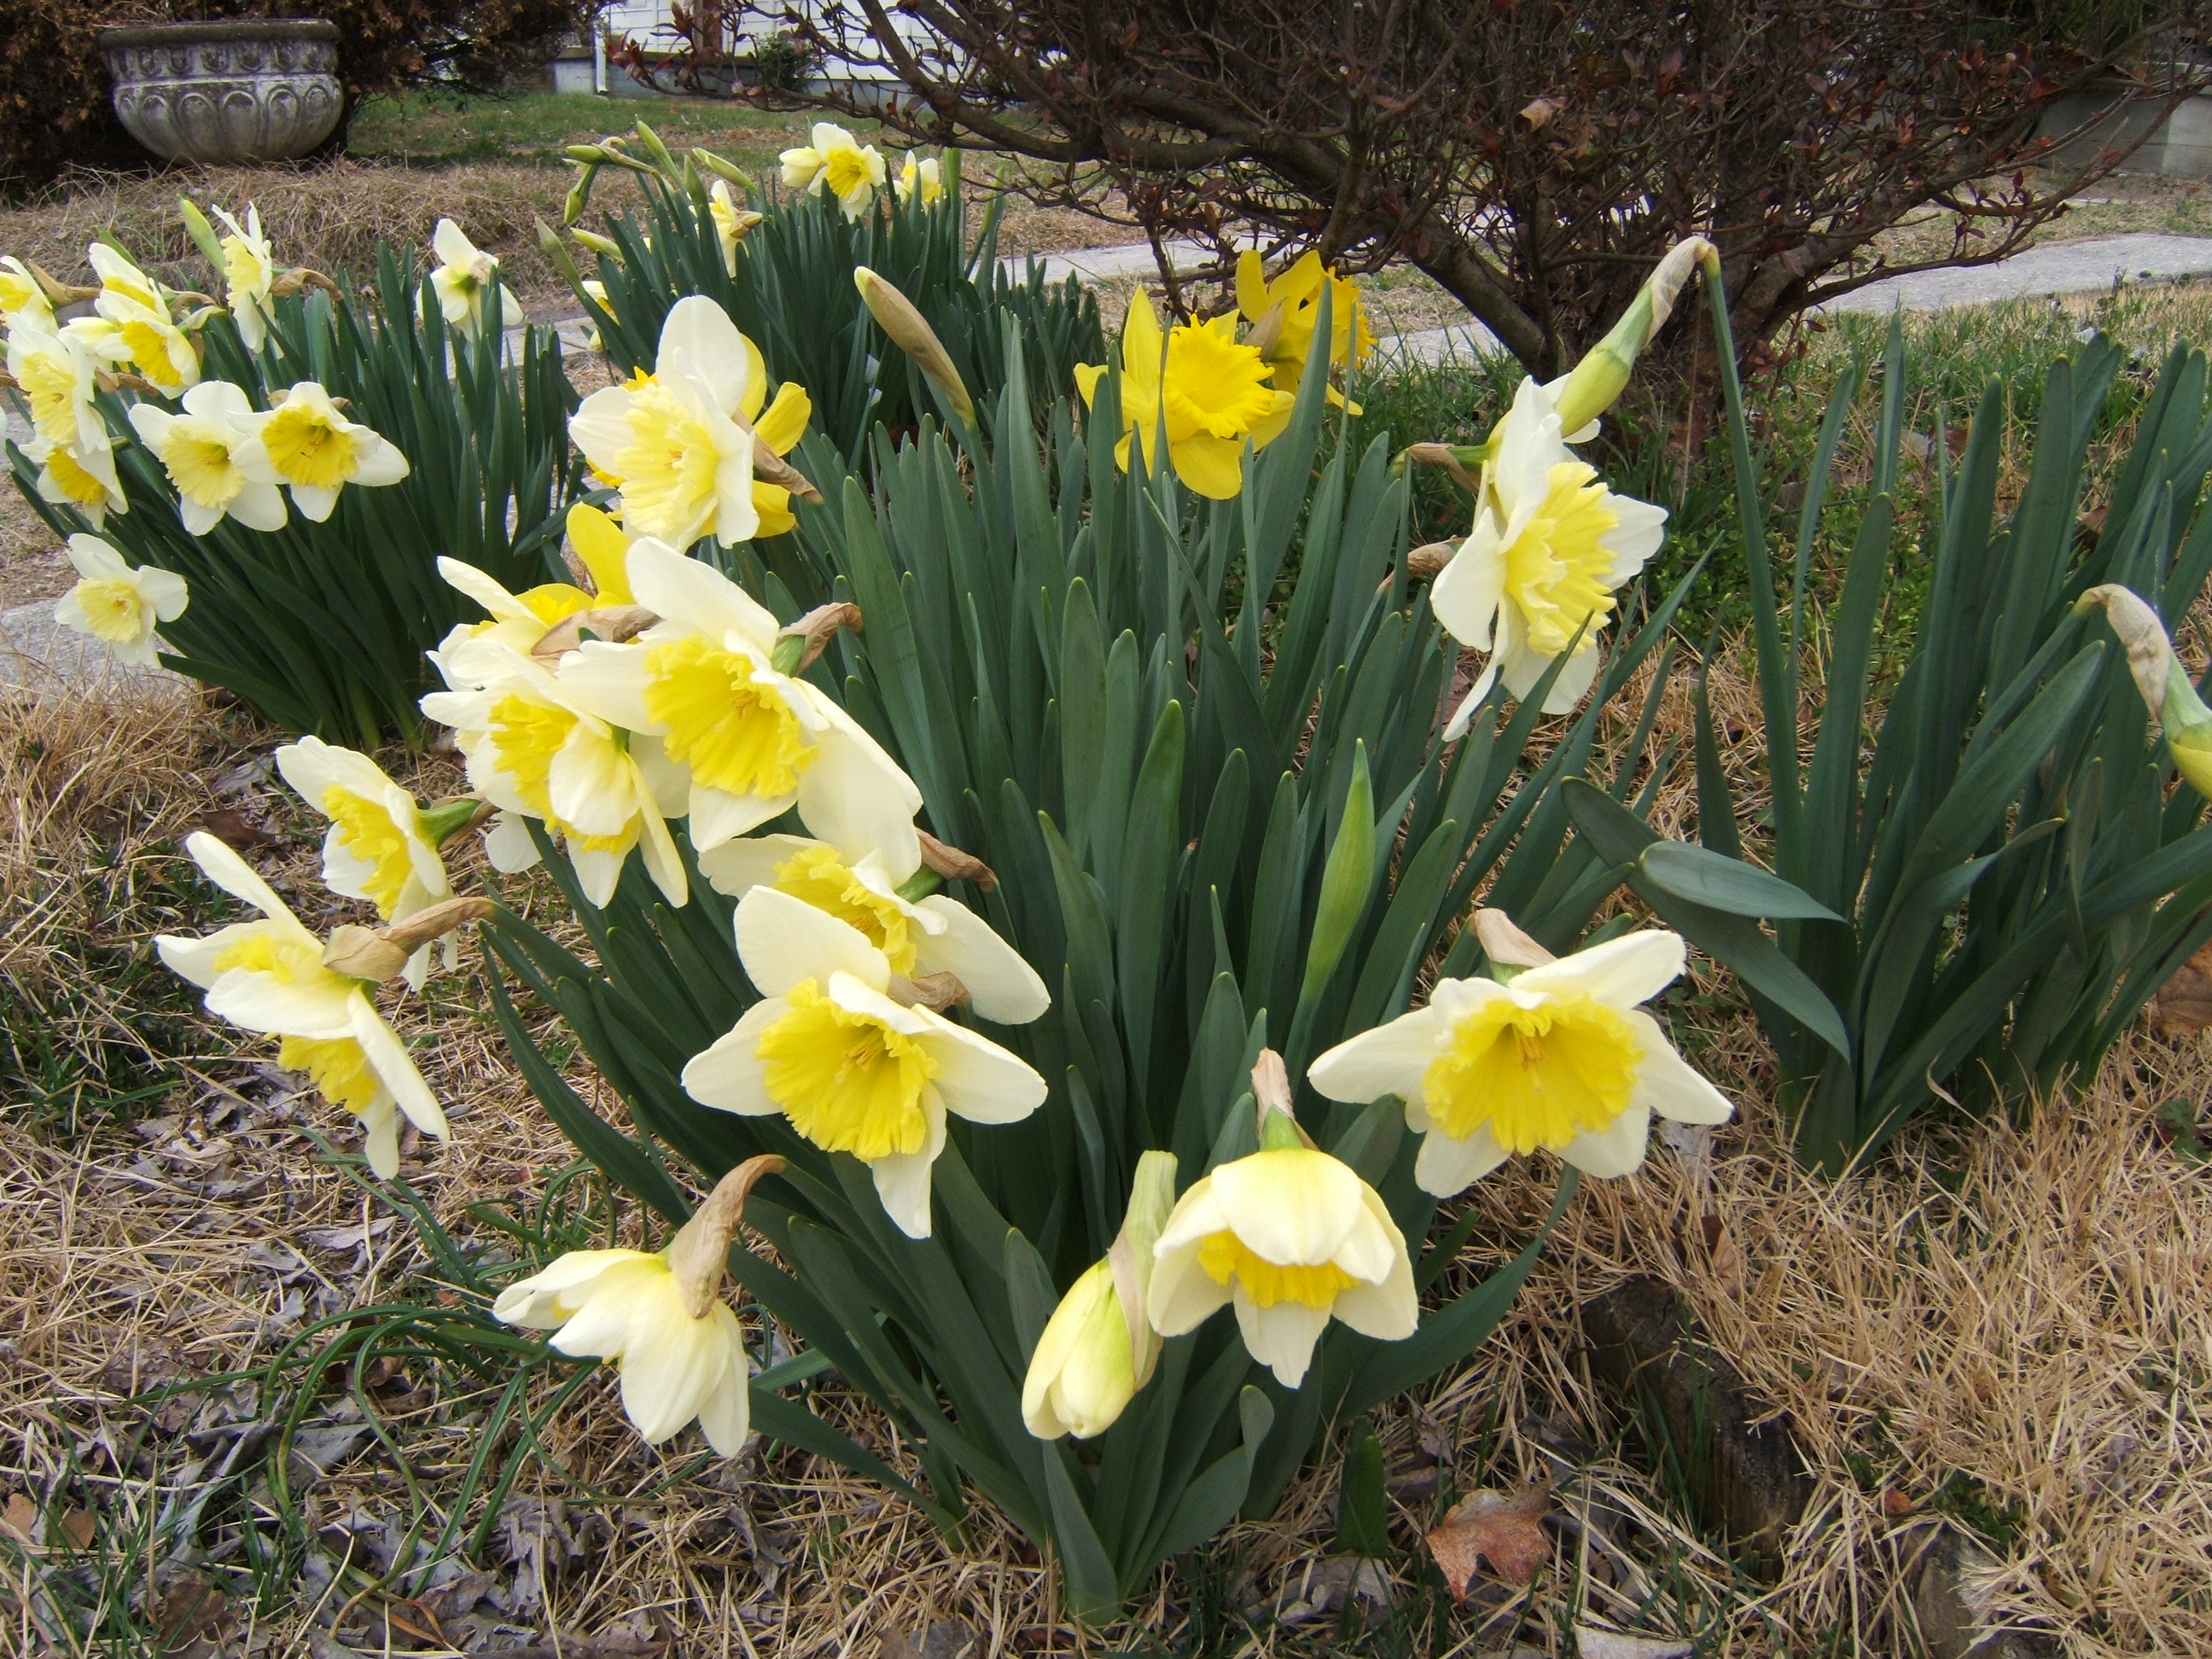 shanenieb bouquet bunch of flowers yellow spring daffodils narcissus